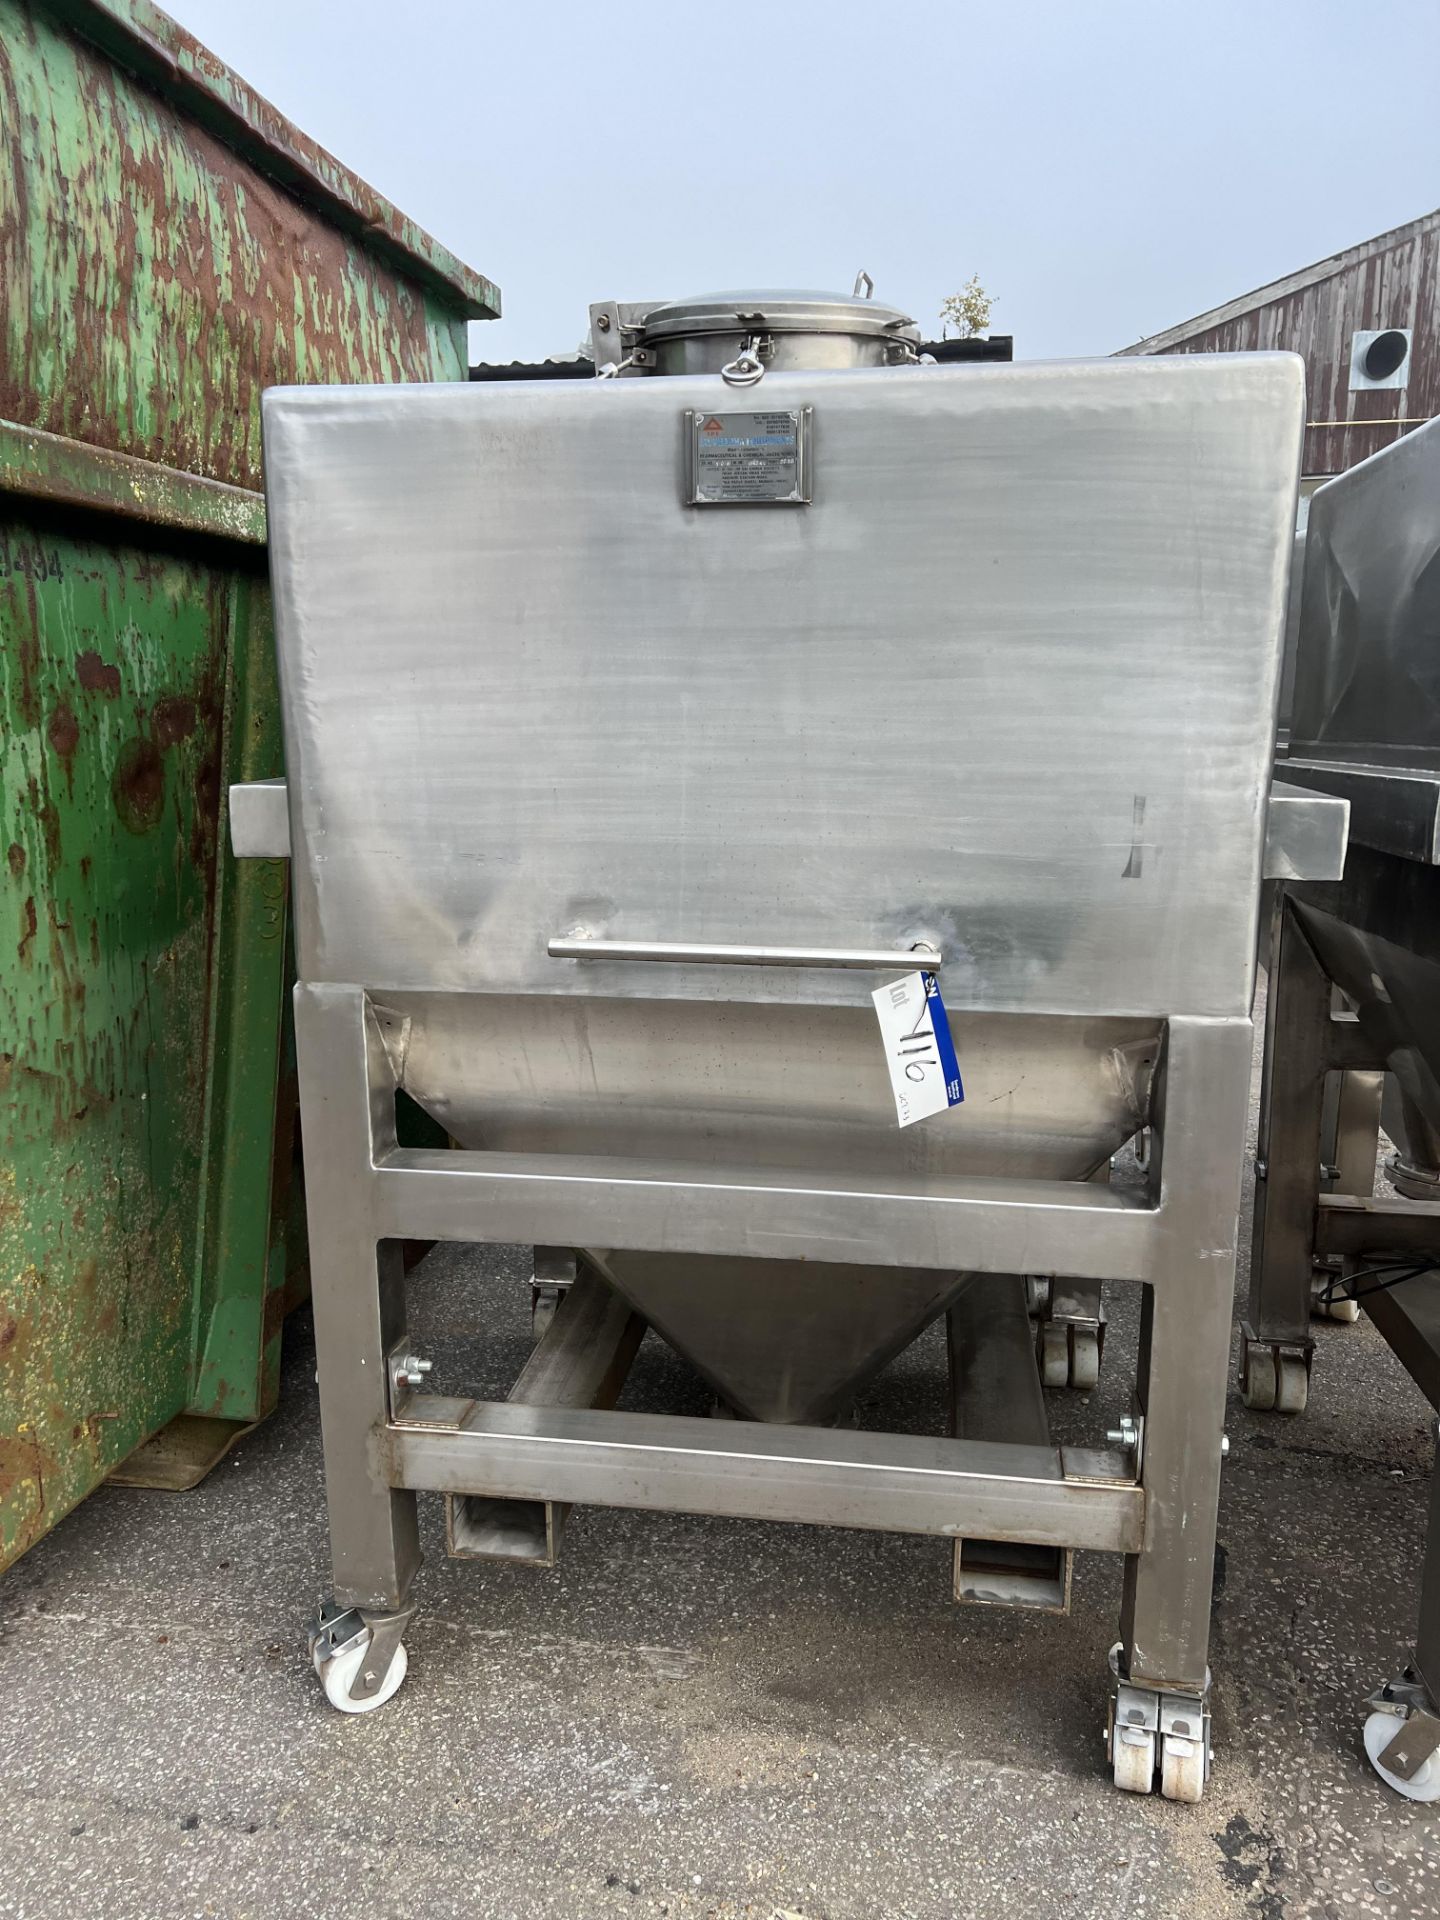 JPE IBC2 KL Fluted Stainless Steel Mobile Tank Lidded, with bottom outlet, approx. 1.5m x 1.4m x 2.